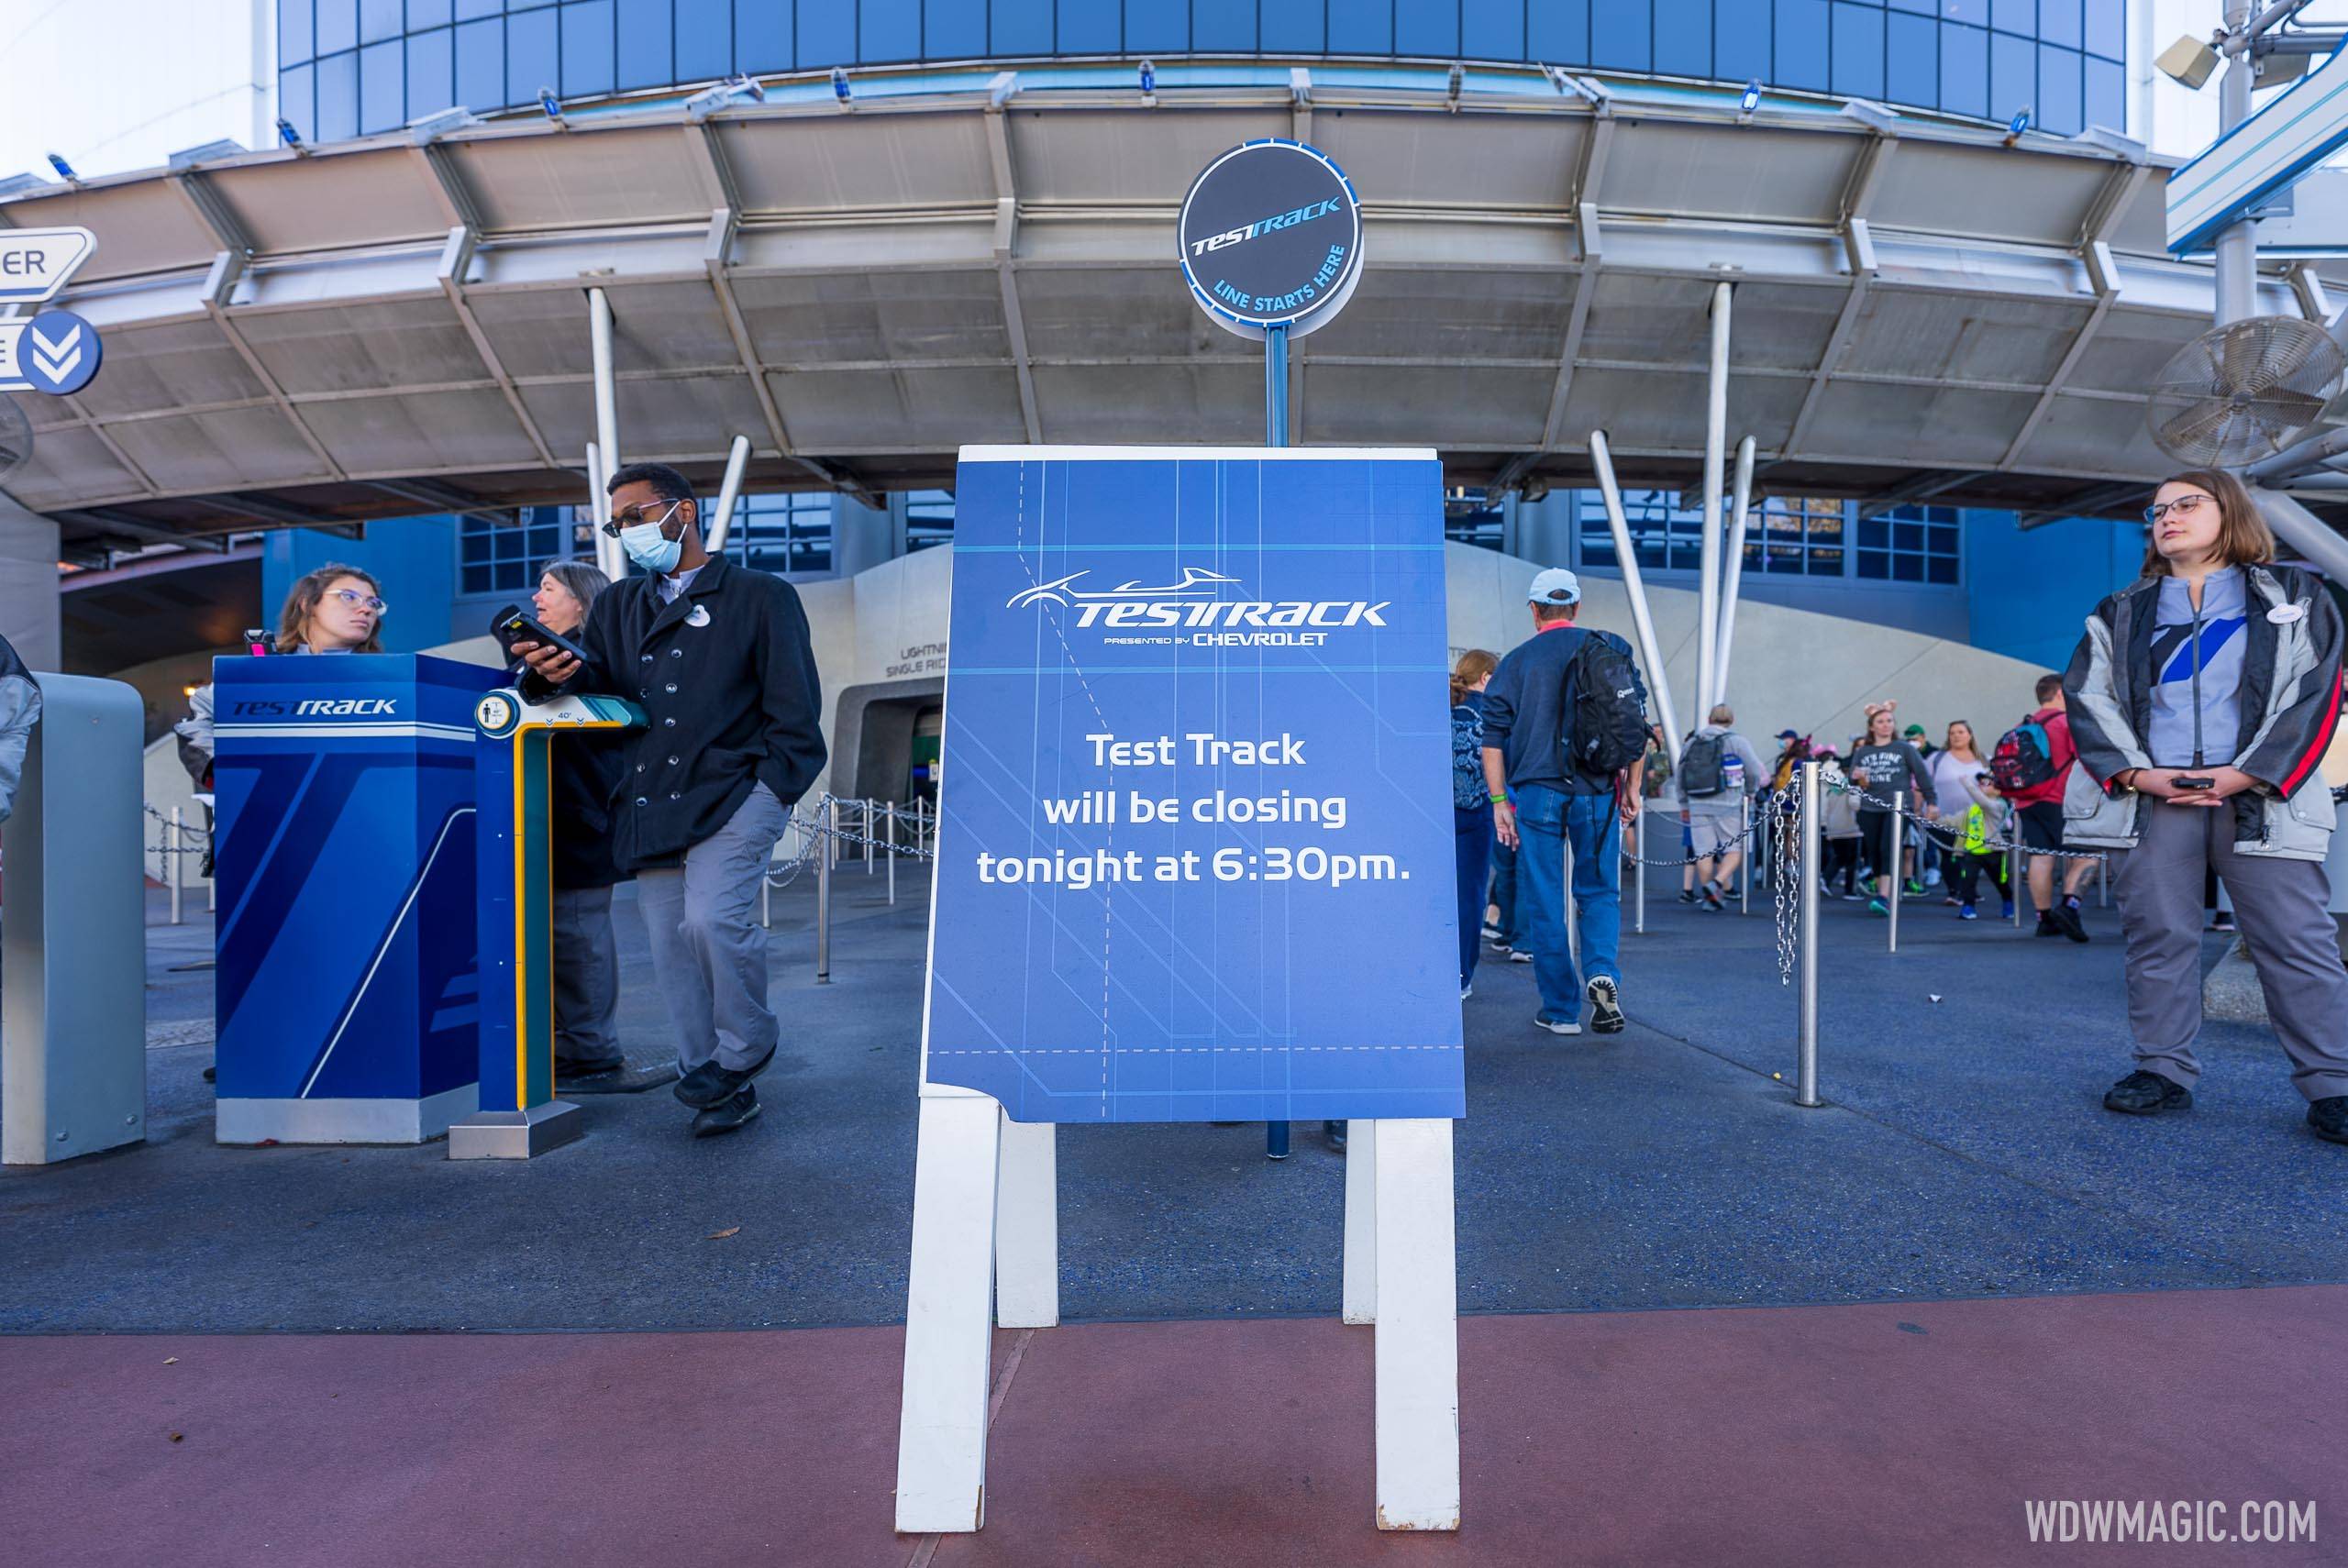 Test Track early closures continue this week at EPCOT